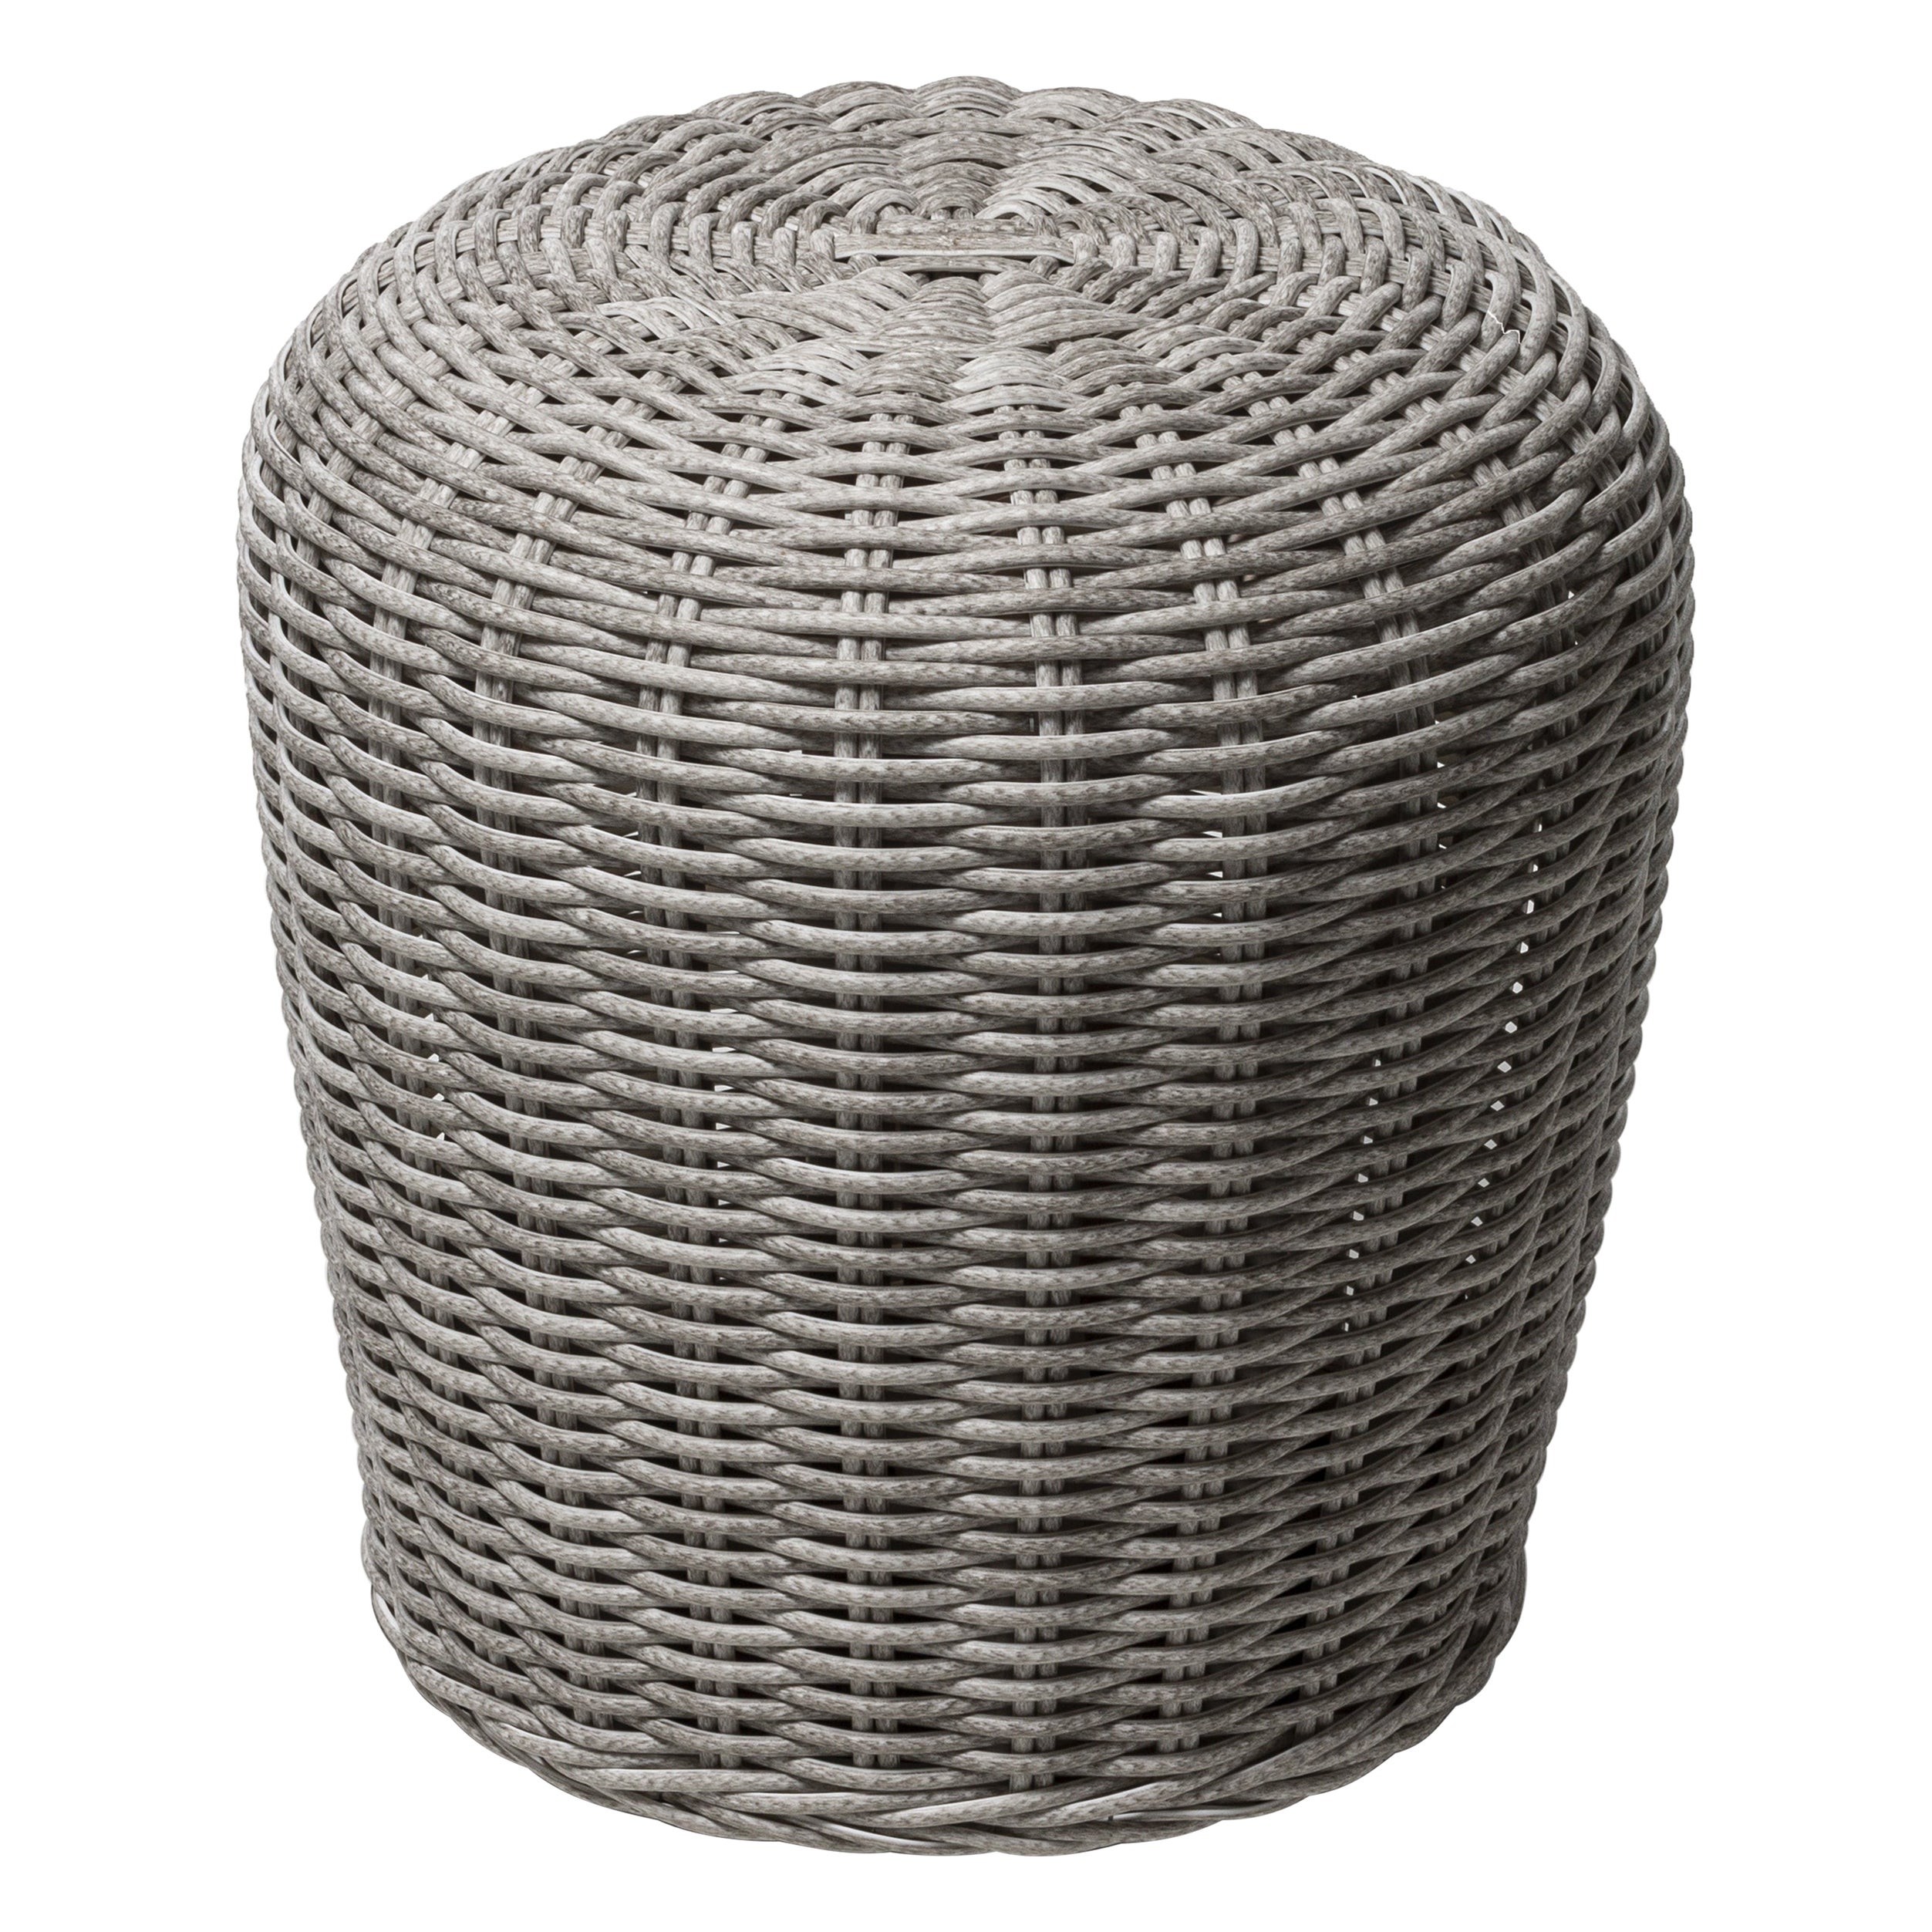 Gervasoni Panda Side Table in White/Gray Resin with Aluminium by Paola Navone For Sale